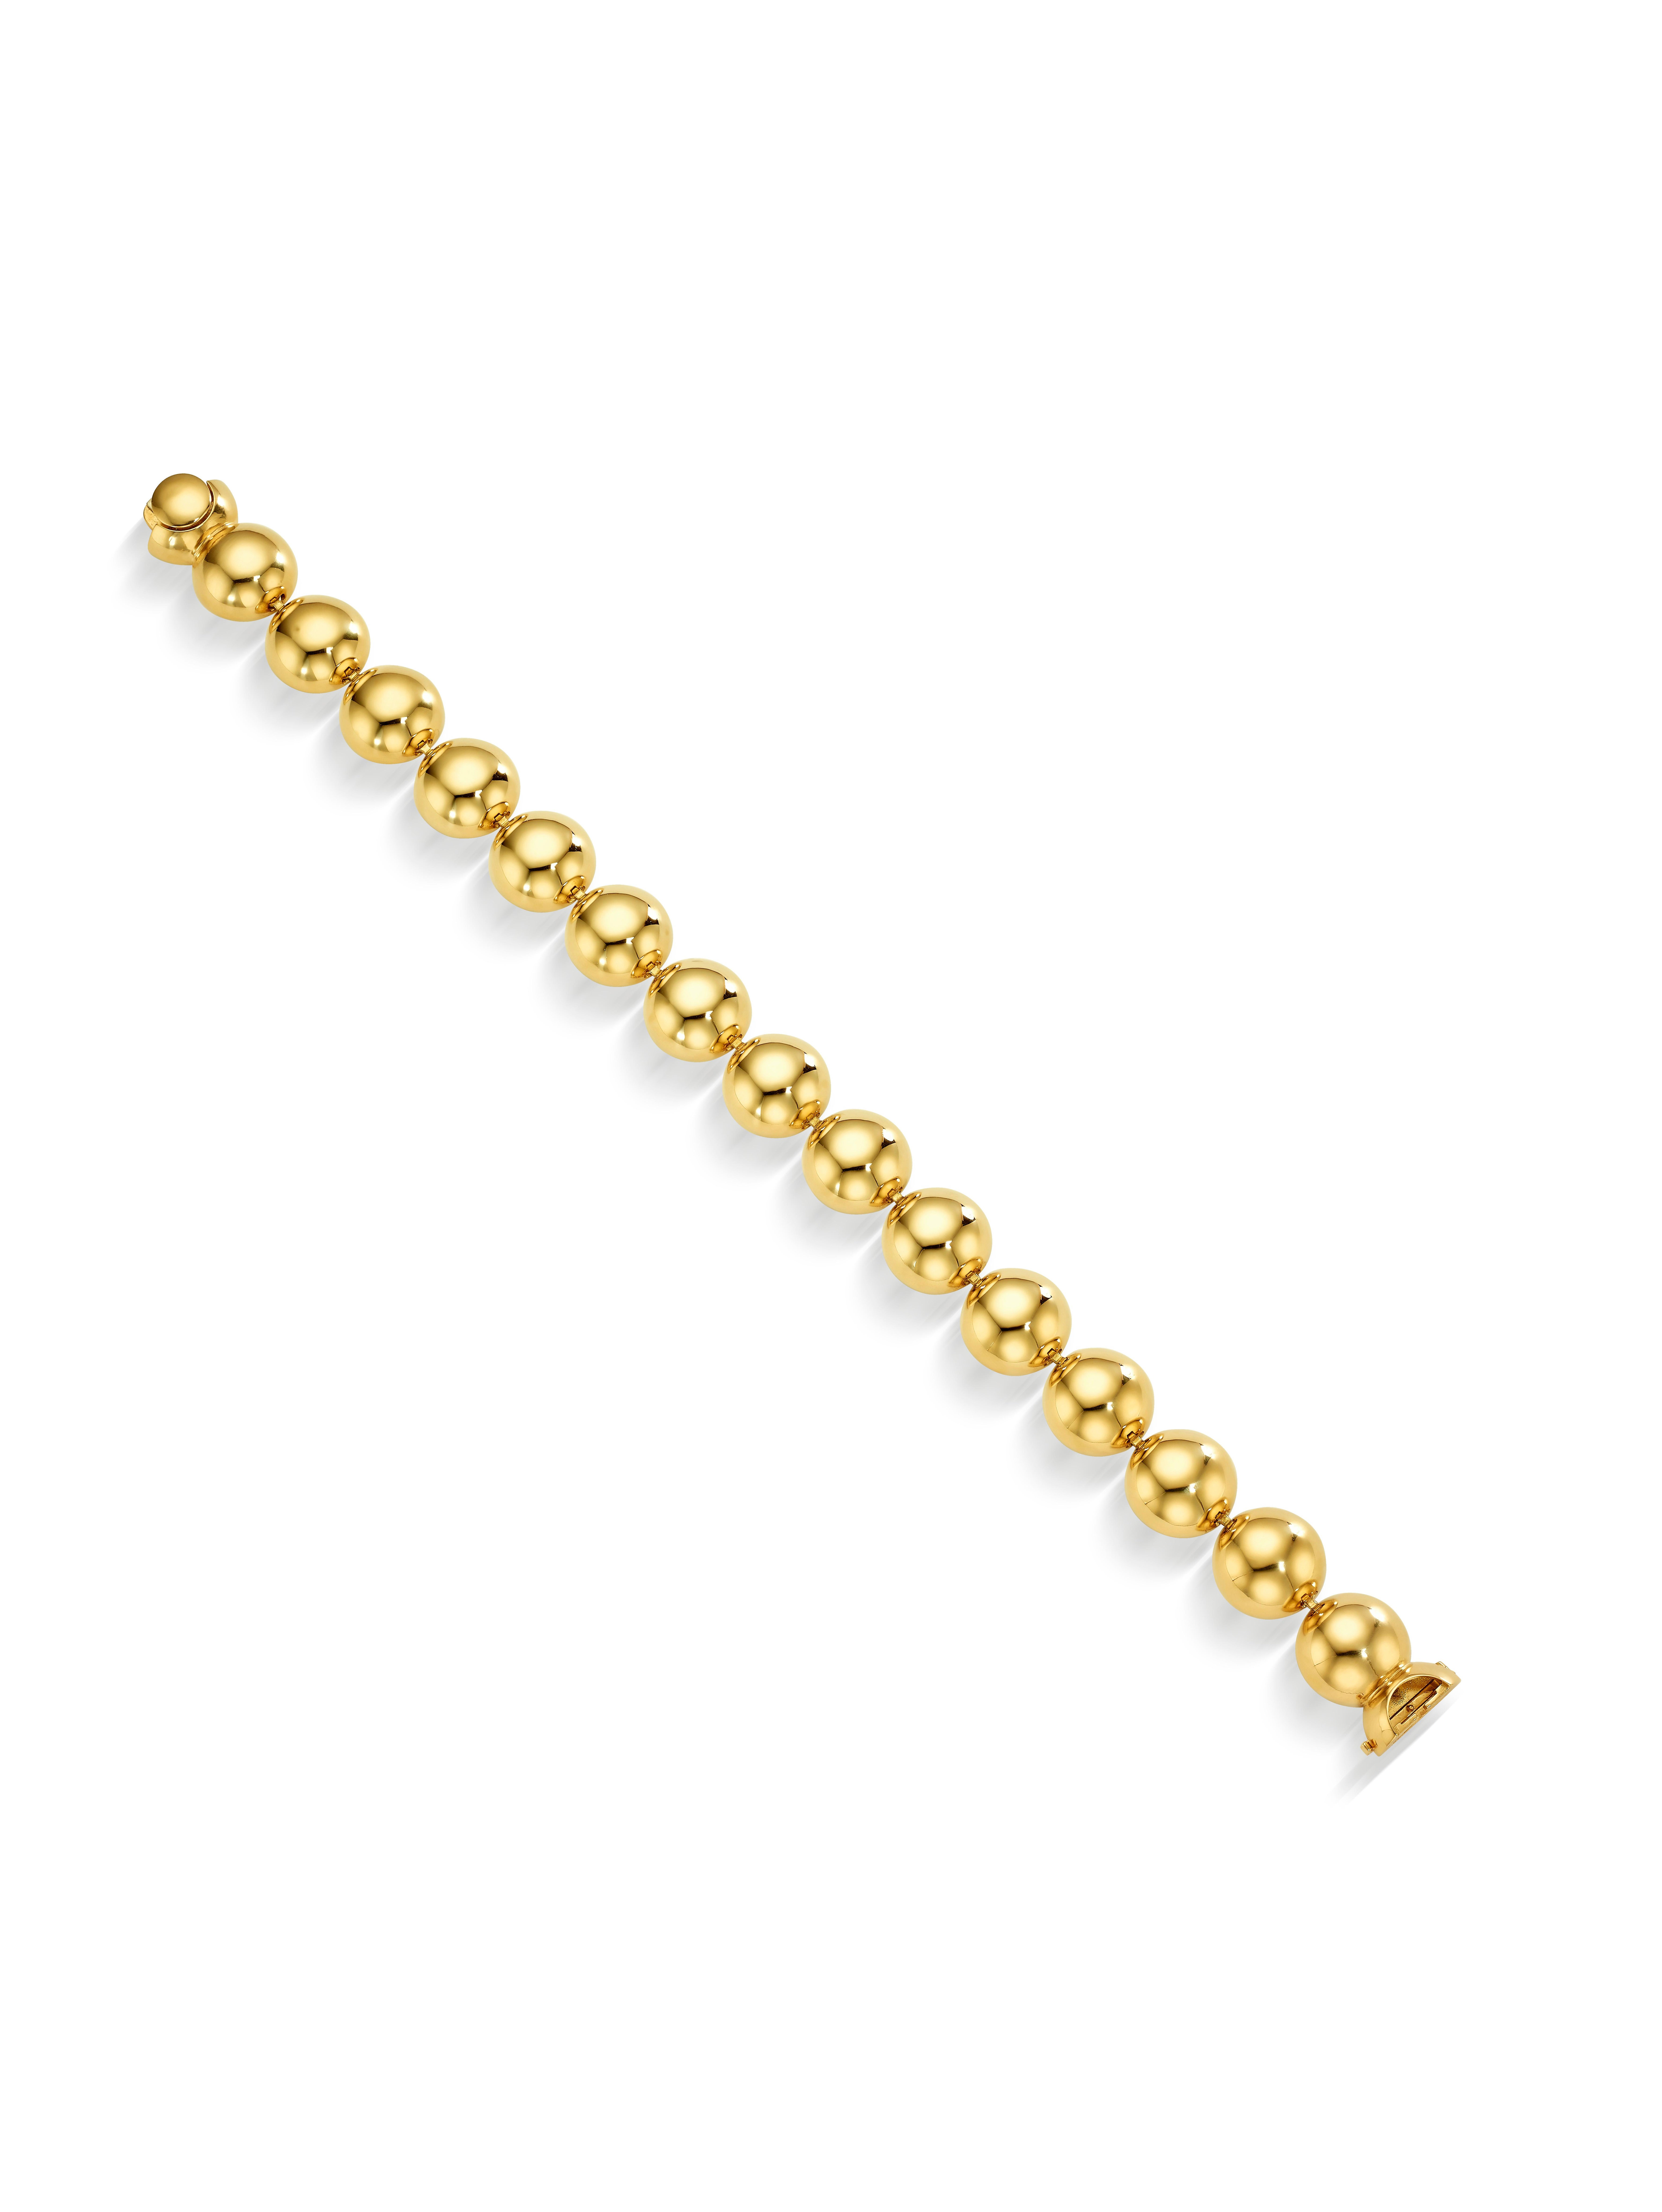 Golden bubbles. Hemispheric droplets encircle the wrist, adding modern glamour to any look, day or night. Handcrafted in 18k high polished gold. Also available in size small and medium.

From the CADAR Psyche Collection
